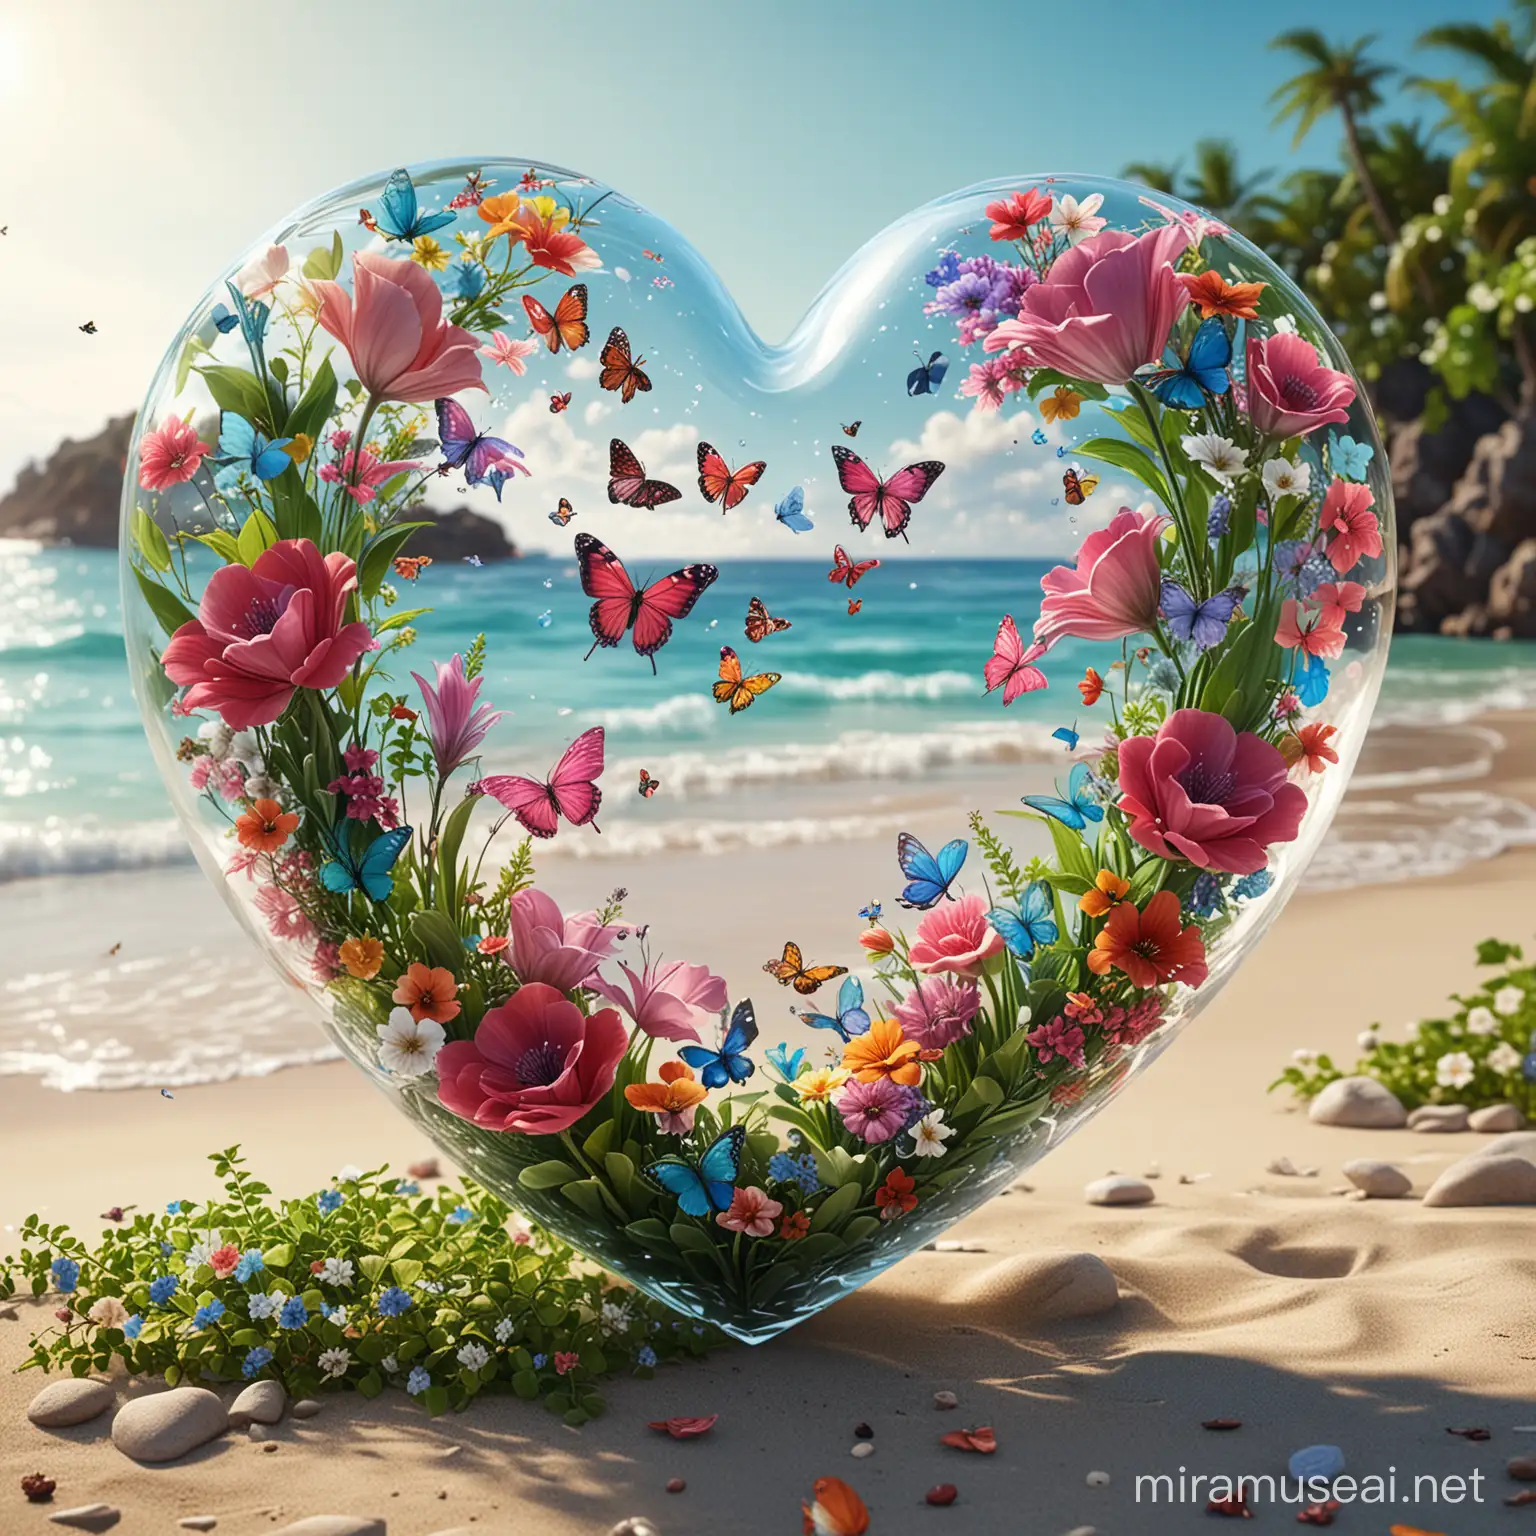 Exquisite 3D Glass Heart with Colorful Flowers and Fairy by the Beach in 8K Ultra HD